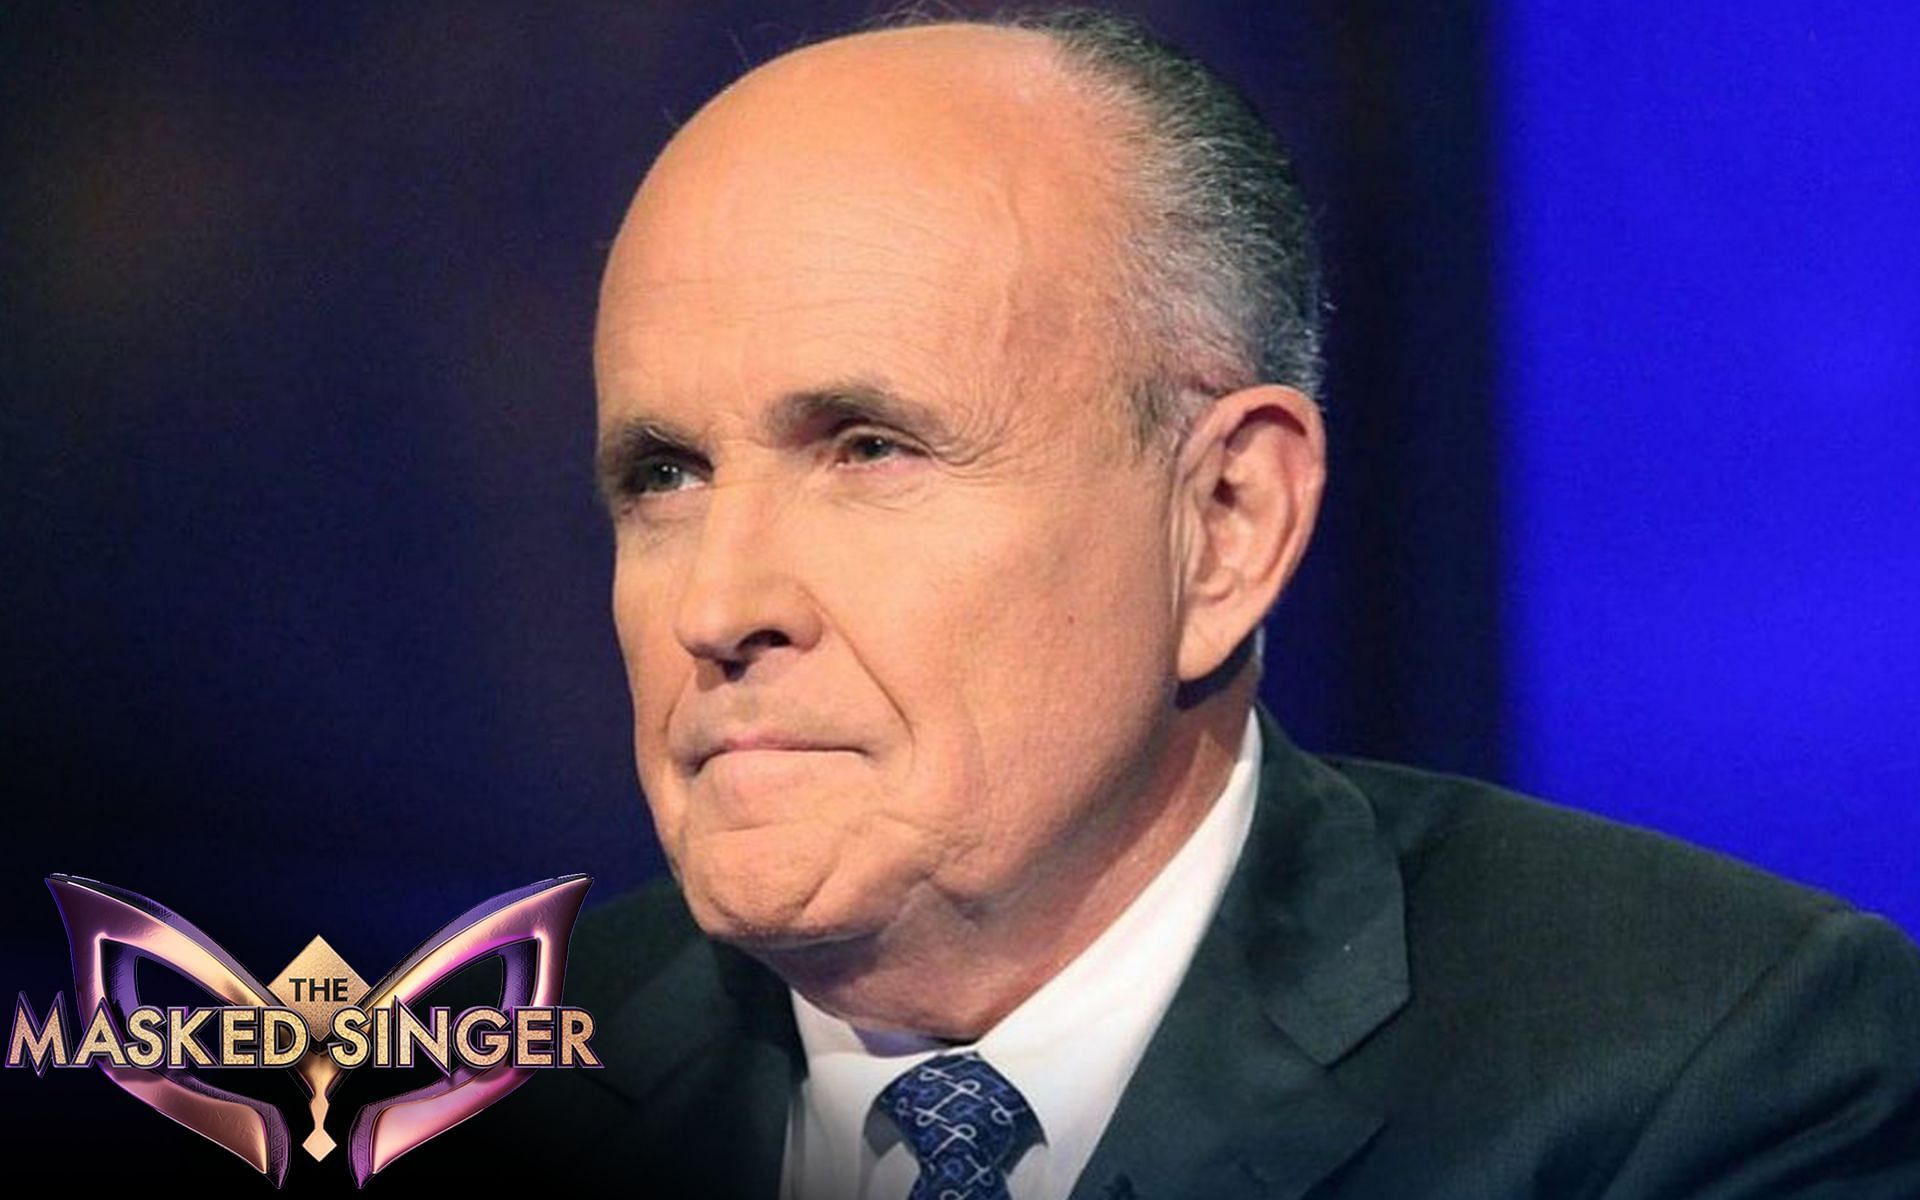 The reality show criticized after unmasking news of Rudy Giuliani surfaces (Image via Sportskeeda)